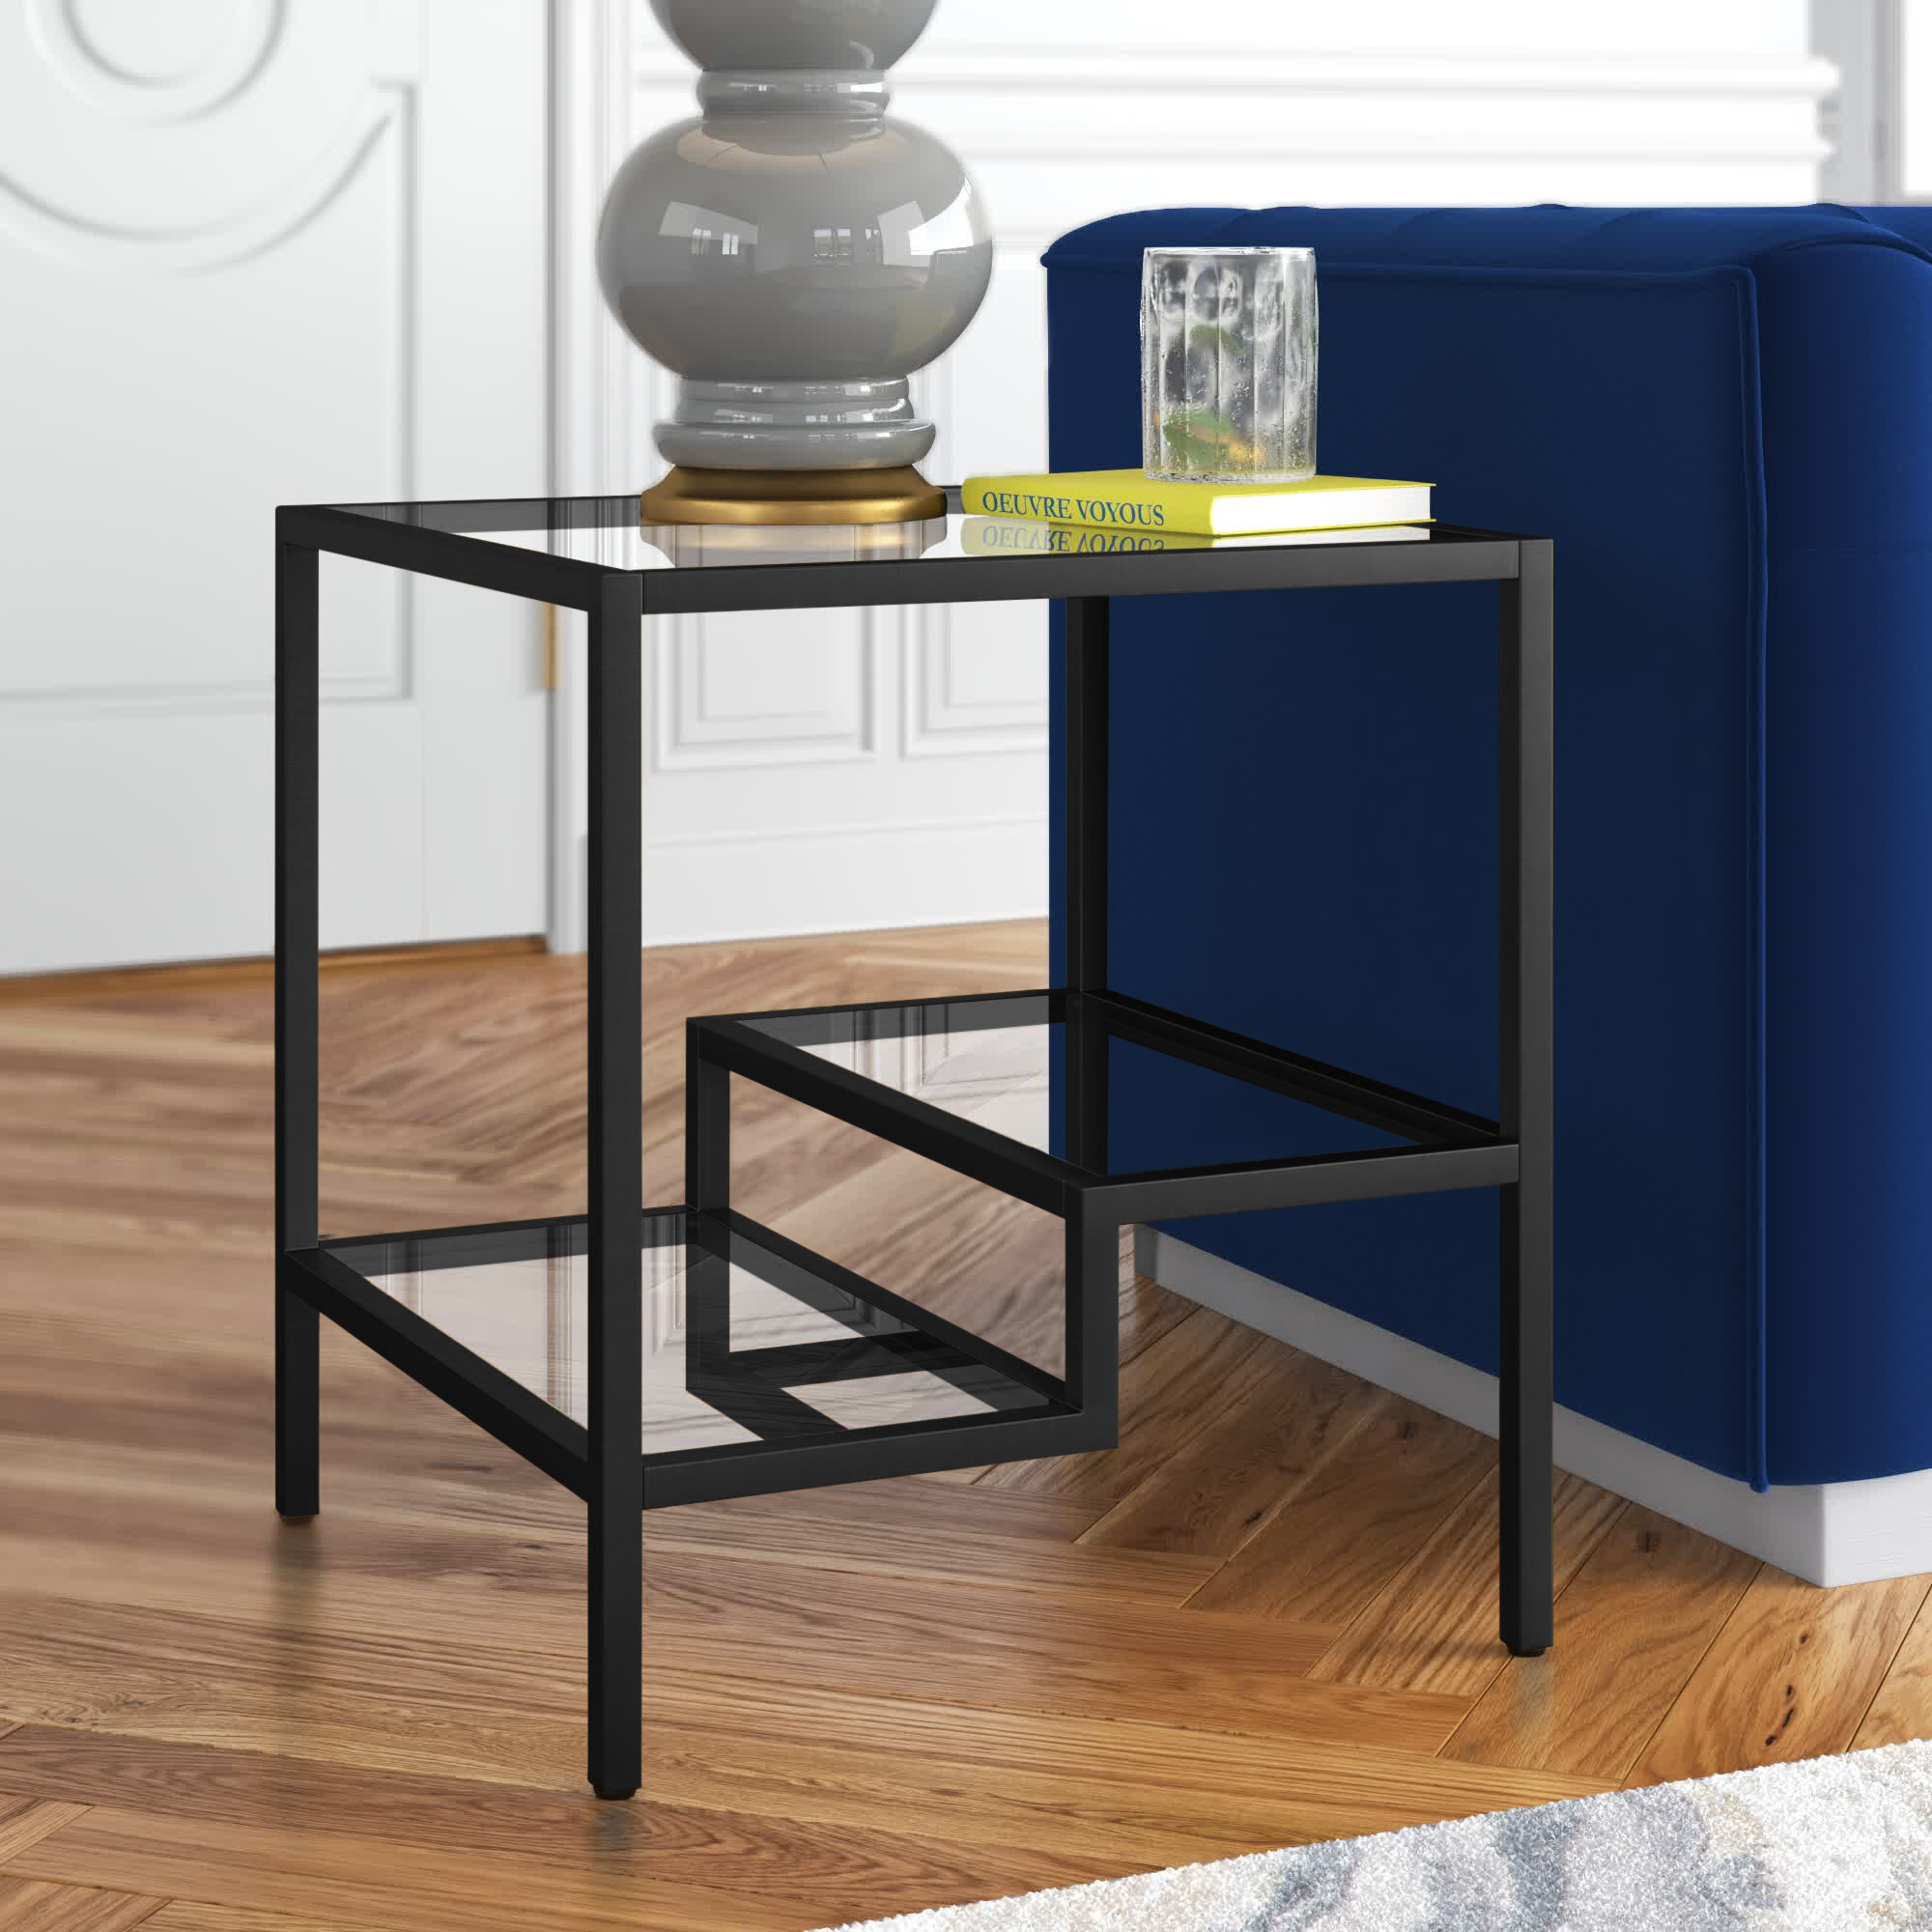 schedel houding Min Etta Avenue™ Darrion 22'' Tall Glass End Table & Reviews | Wayfair